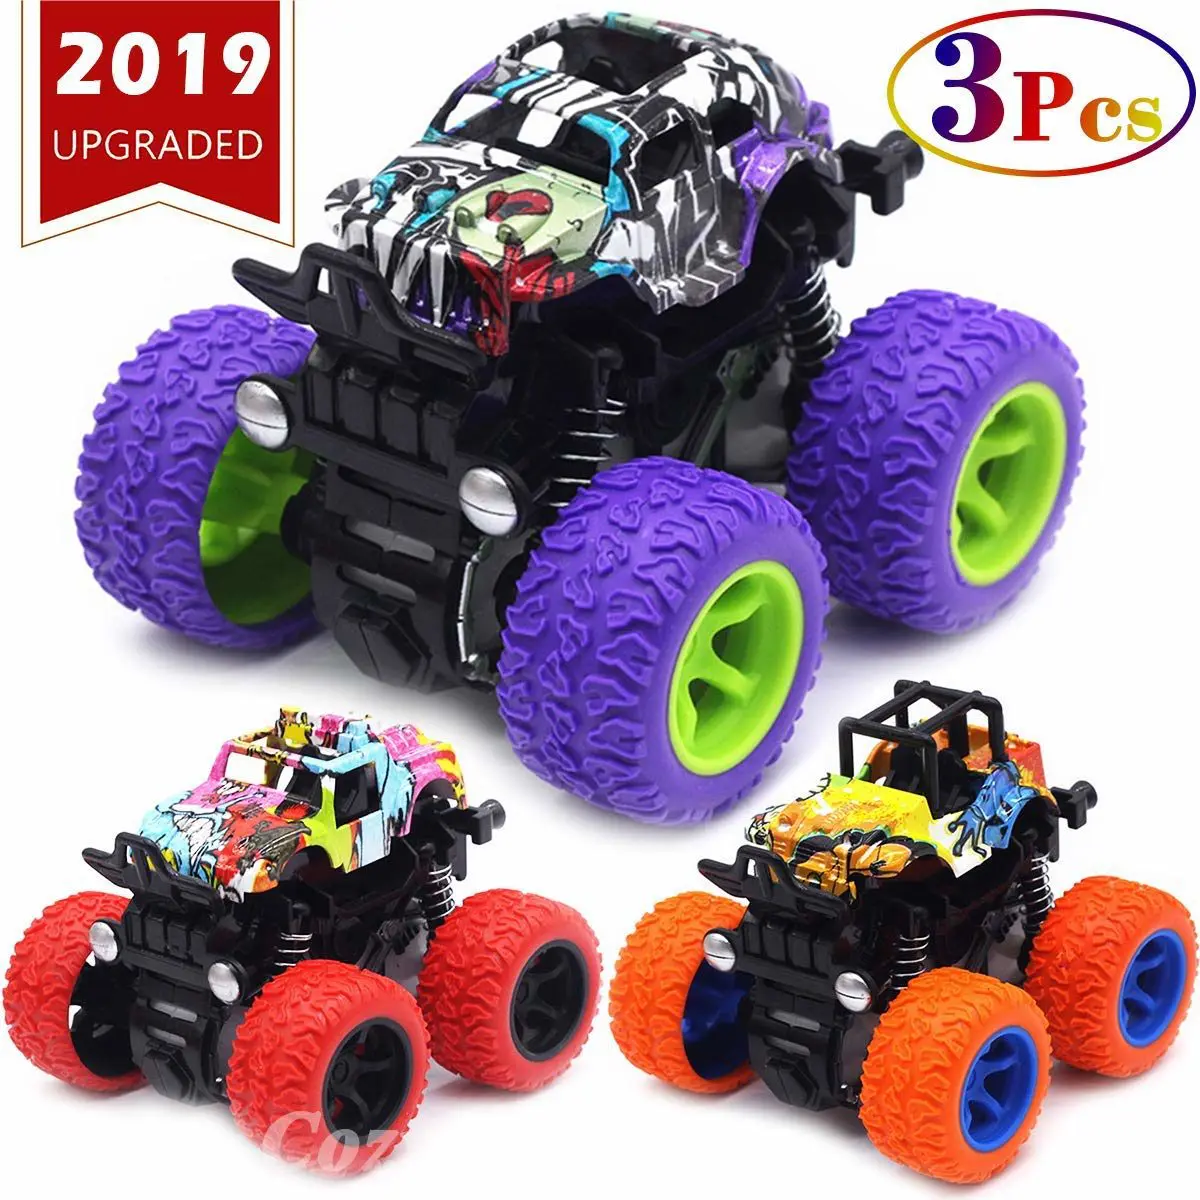 Monster Trucks Toys for Boys - Friction Powered 3-Pack - Top Toys and Gifts for Four Year Old Boys 1